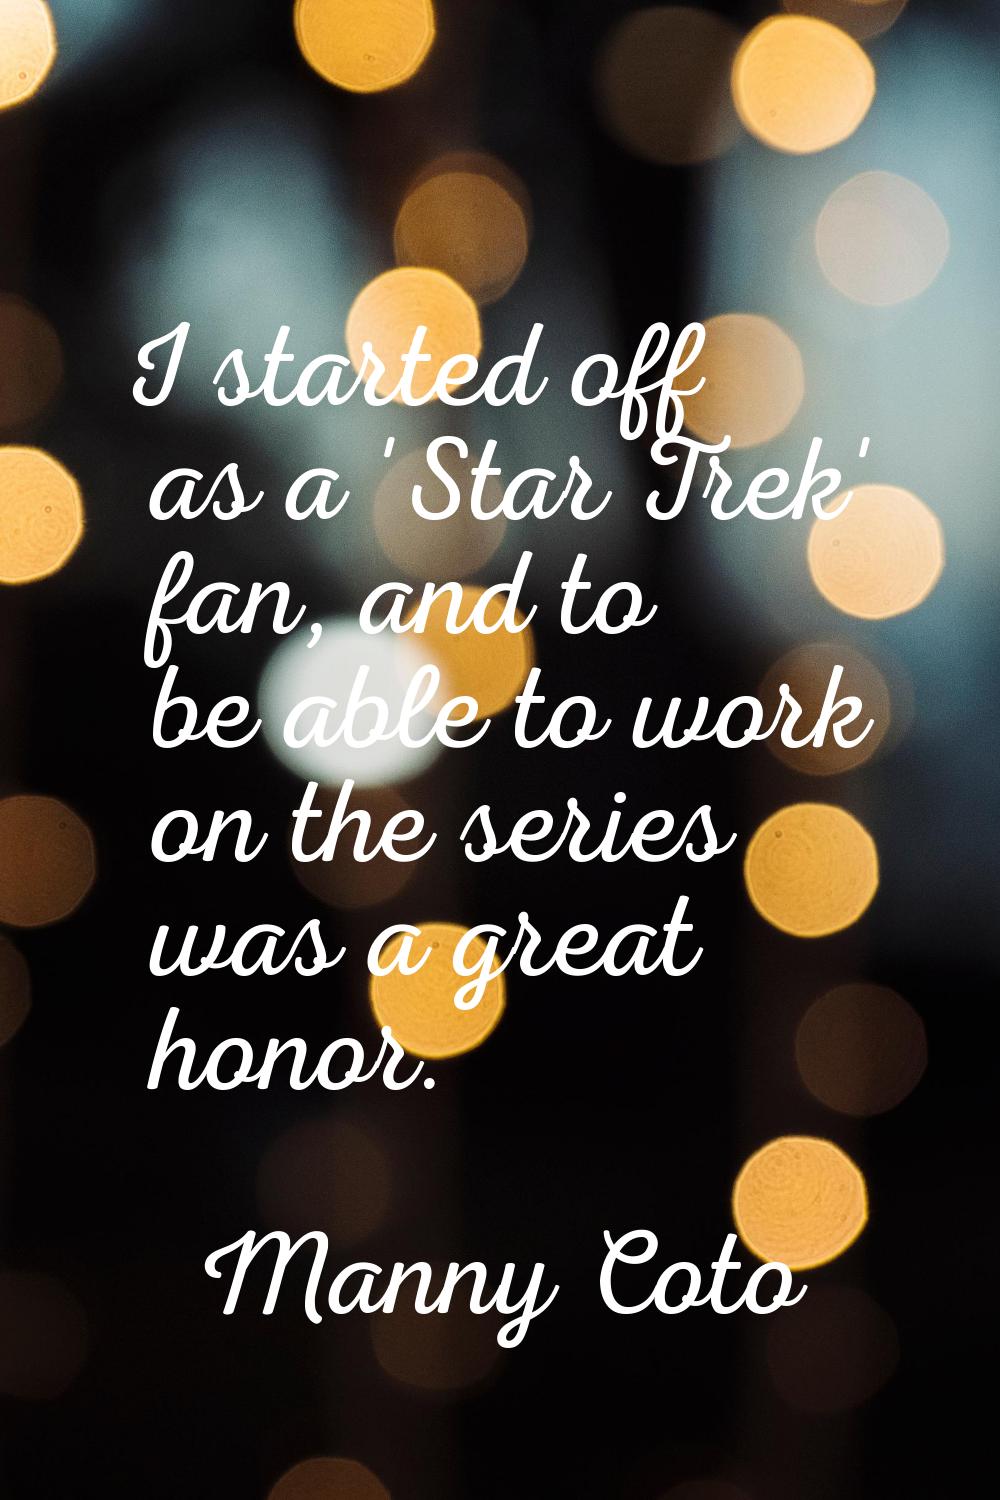 I started off as a 'Star Trek' fan, and to be able to work on the series was a great honor.